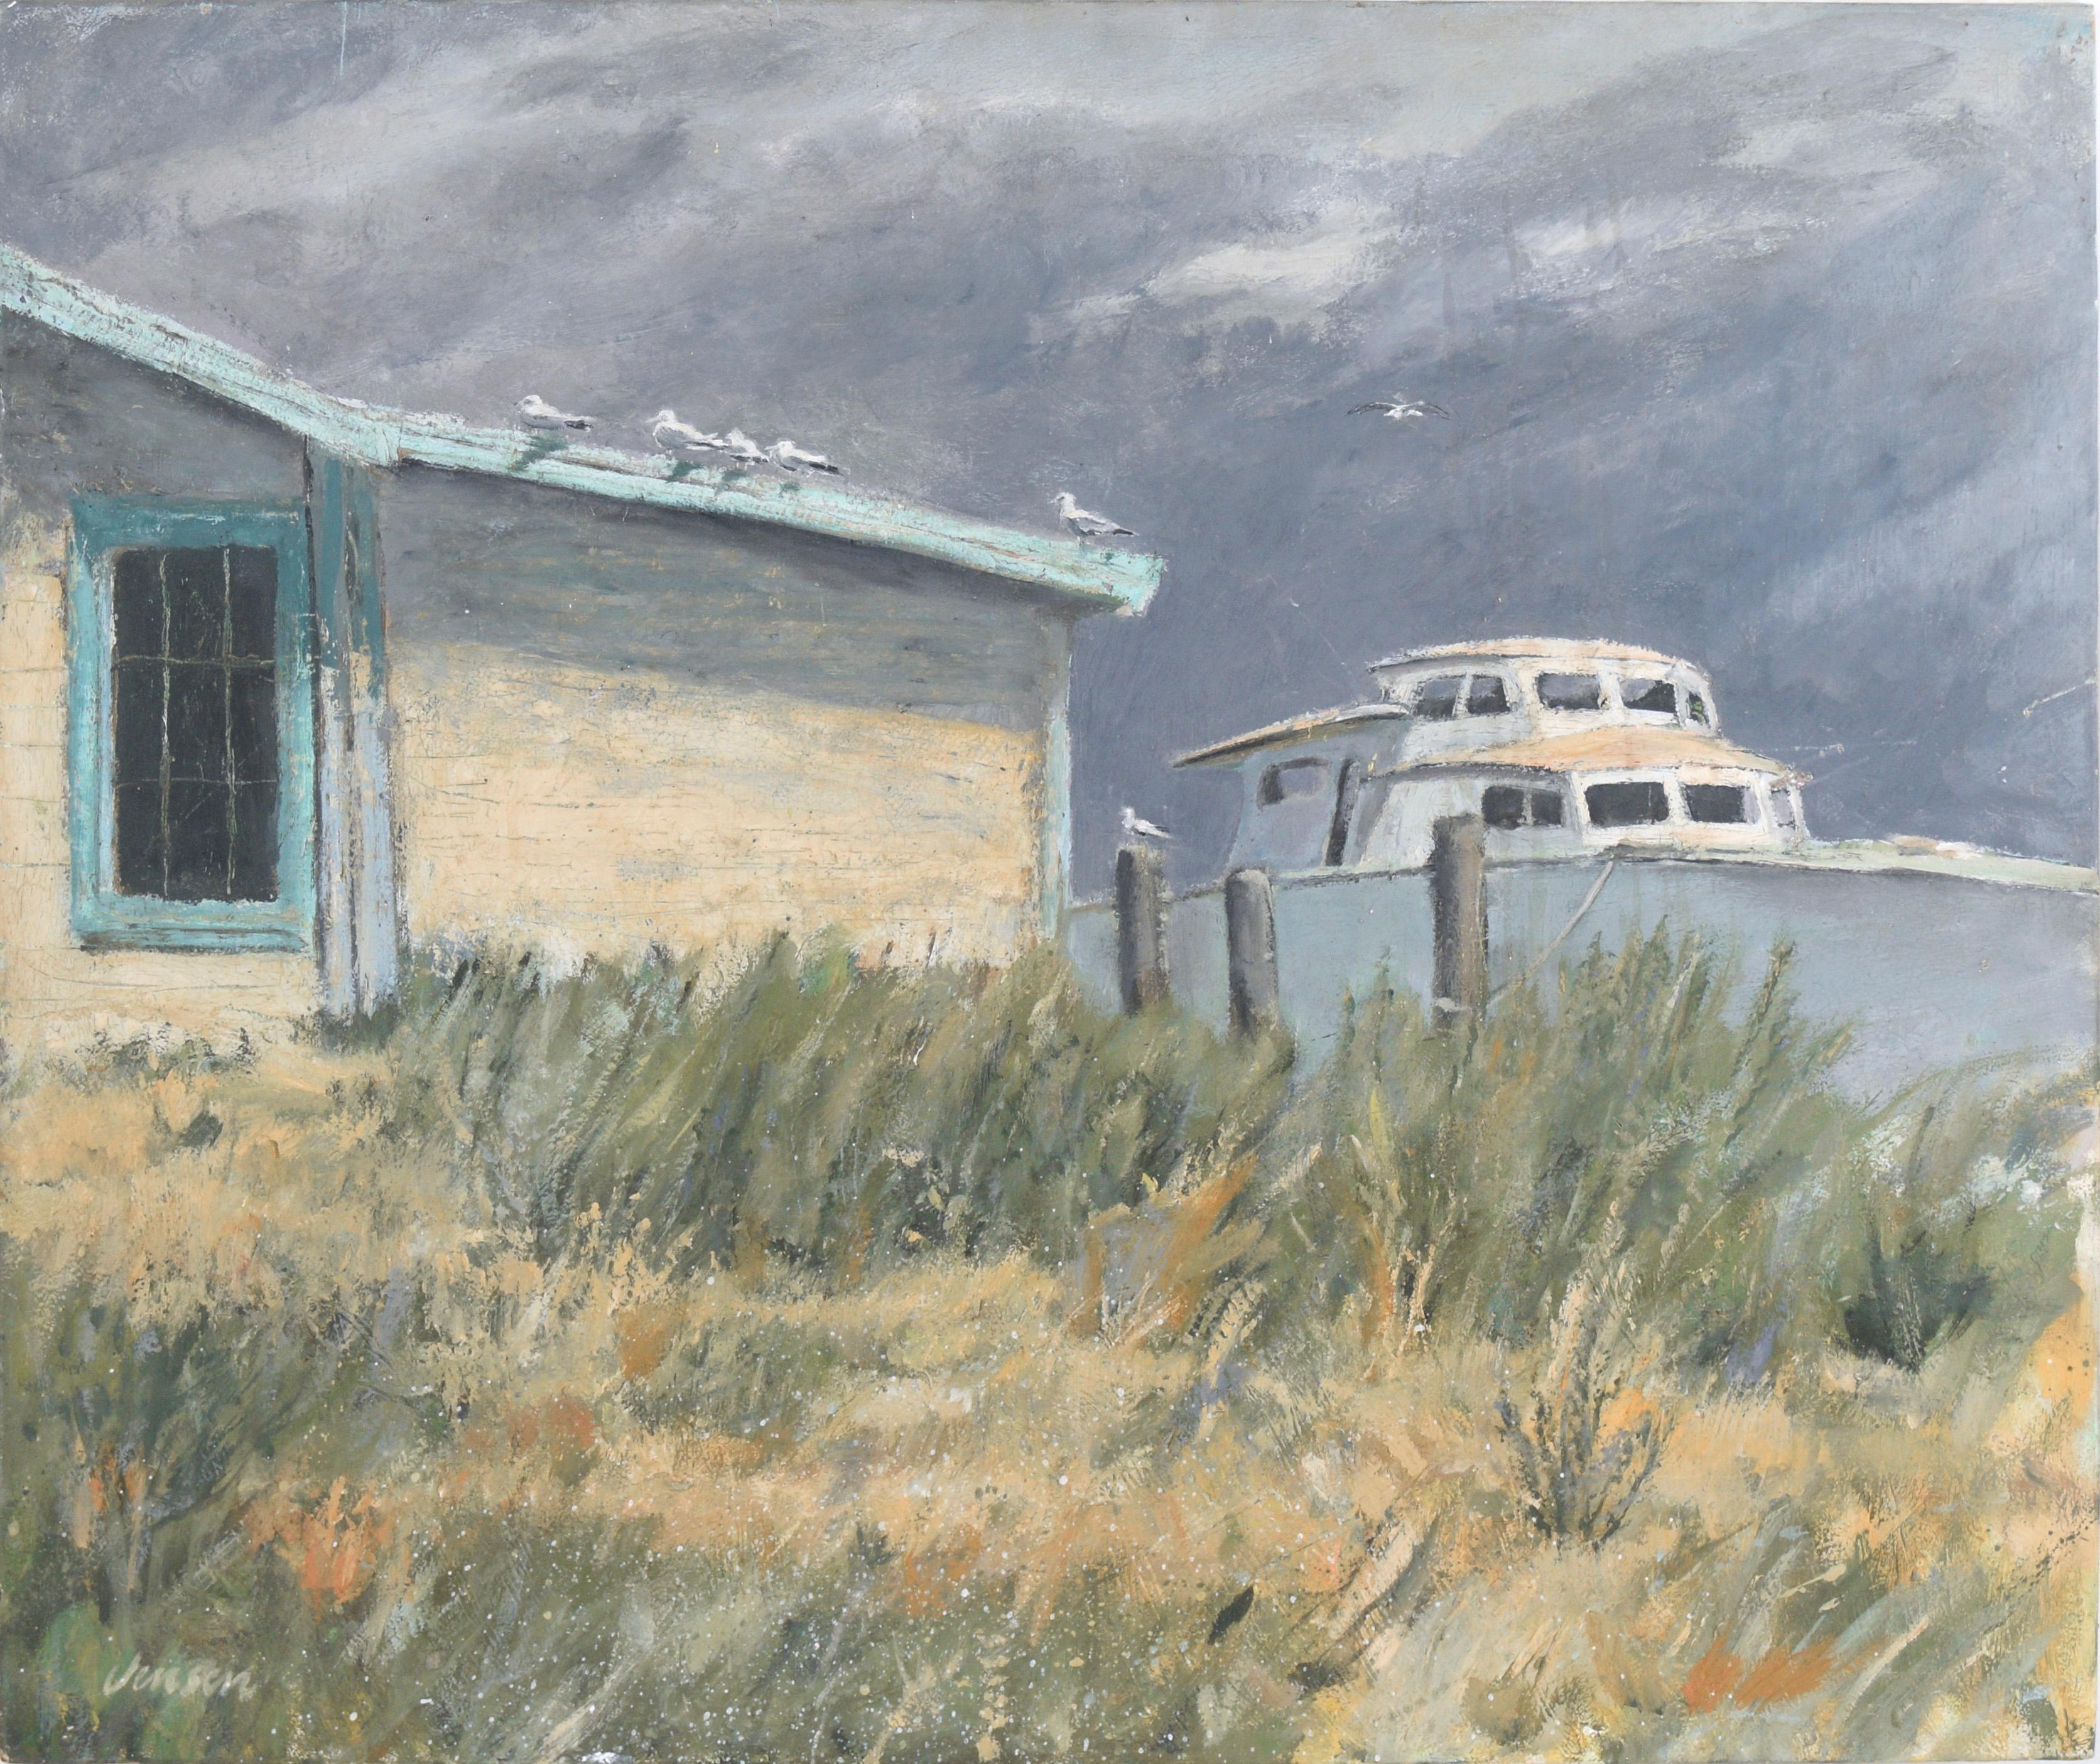 Unknown Figurative Painting - Ship and  Boathouse with seagulls - Coastal Landscape Oil on Masonite by Jensen